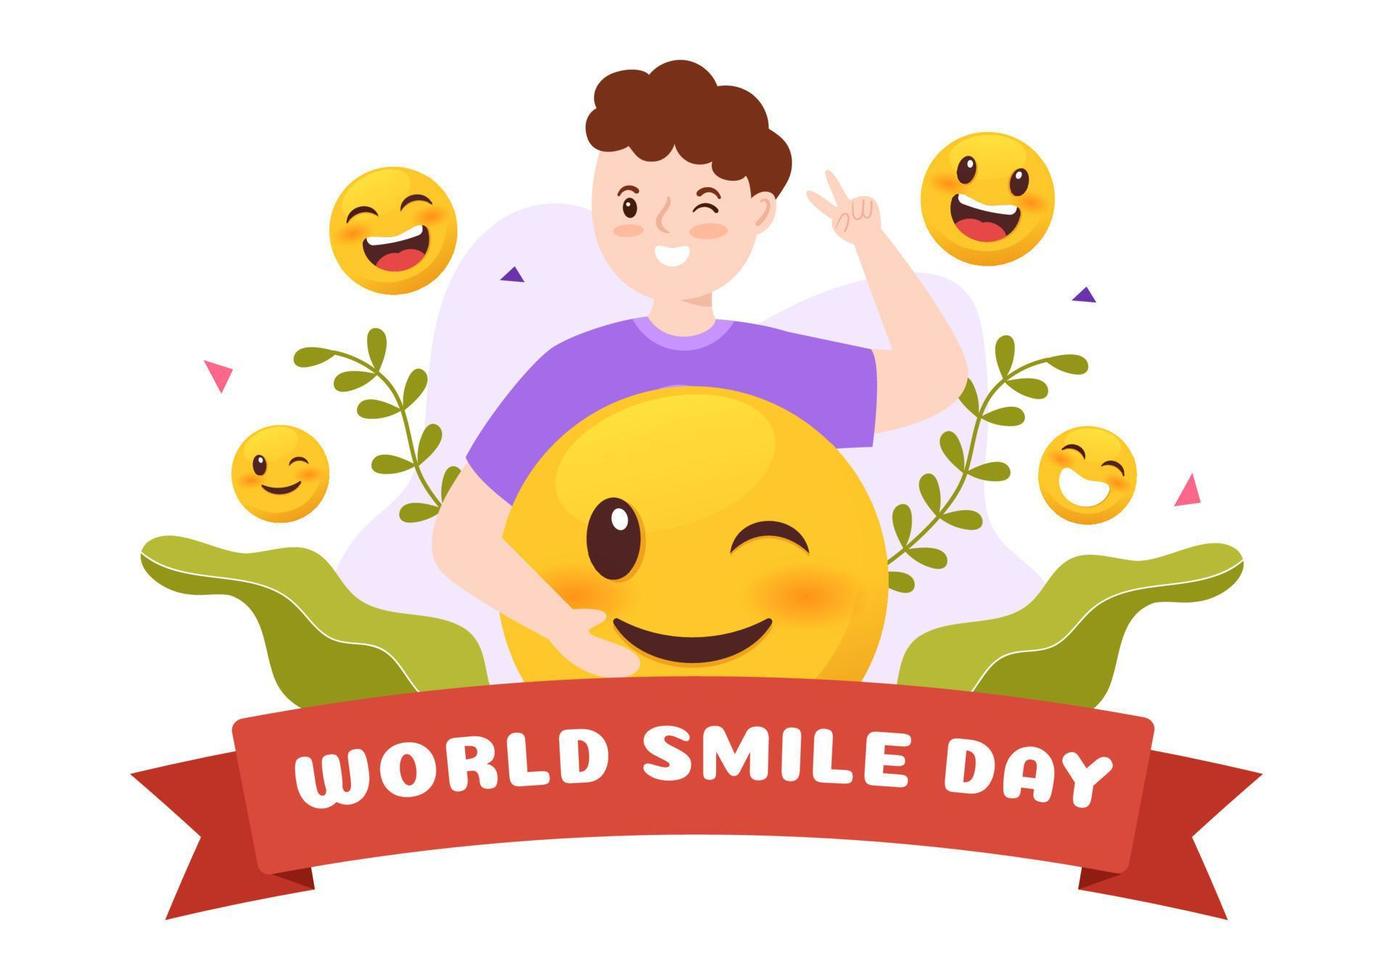 World Smile Day Hand Drawn Cartoon Illustration with Smiling Youth and Happiness Face in Flat Style Background vector